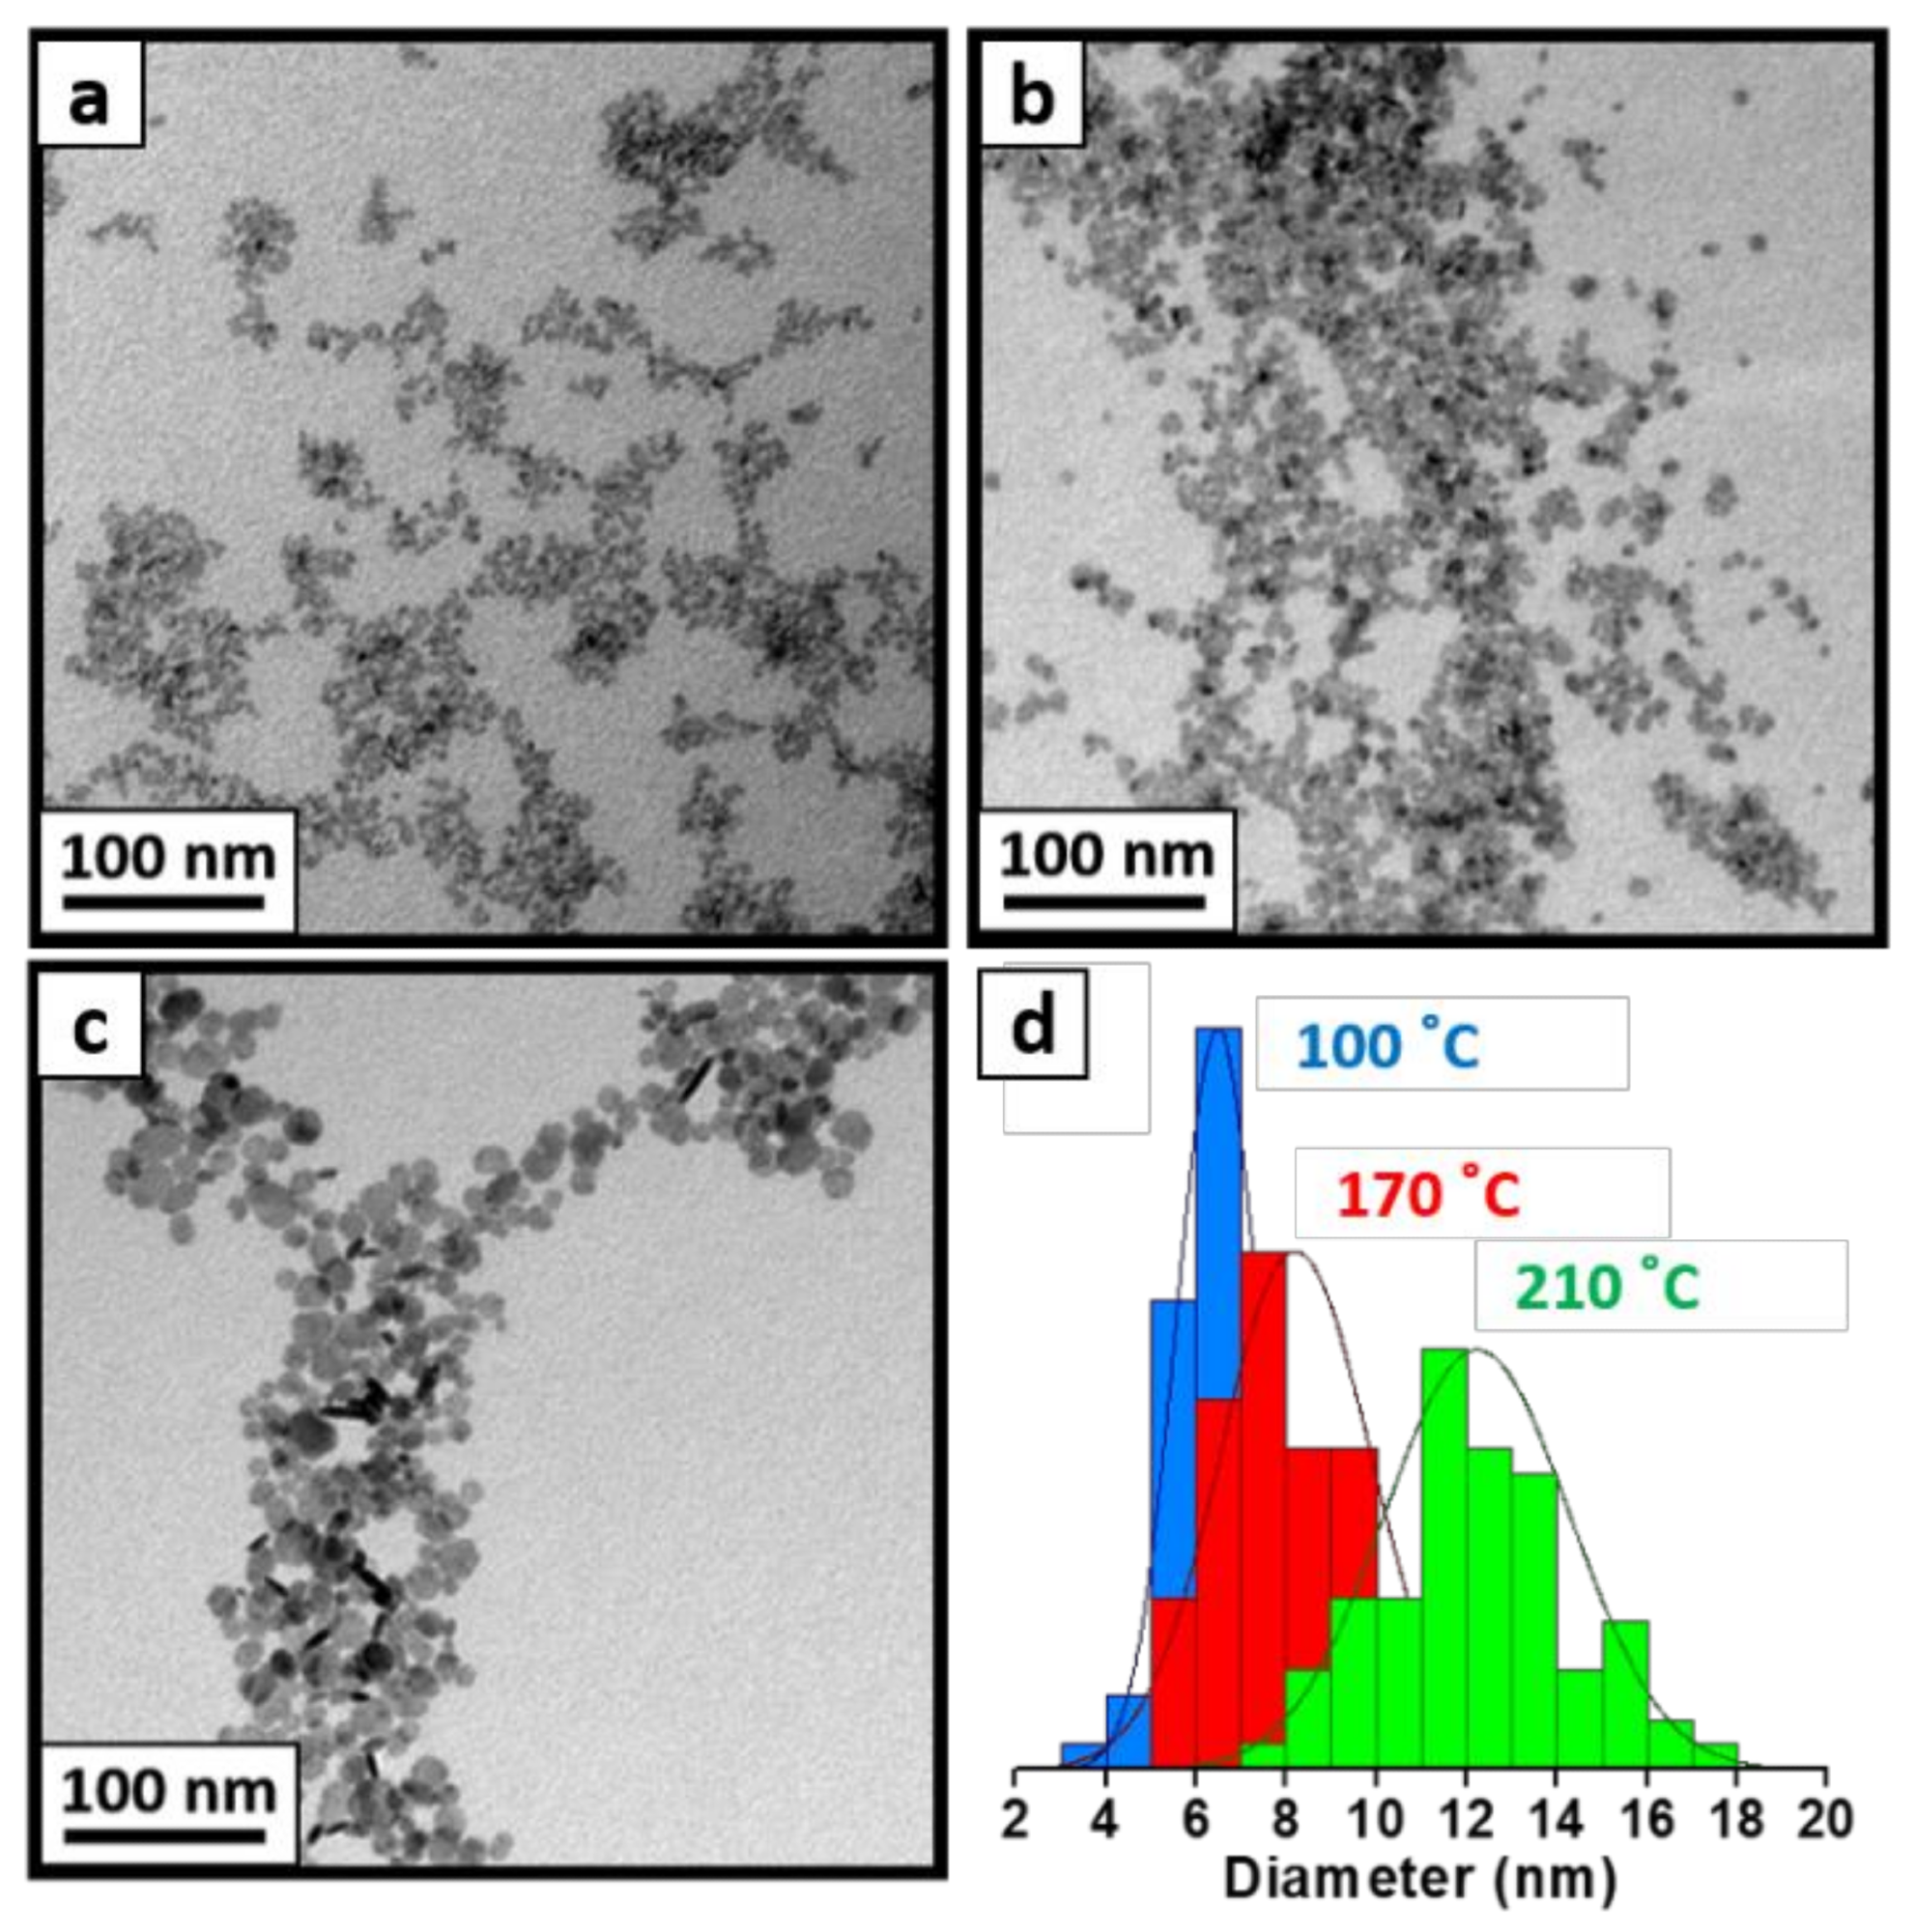 TEM images of as-synthesized LaF3 patchy NCs via coprecipitation method at 100 °C (a) and after a hydrothermal post-treatment at 170 °C (b) and 210 °C (c). TEM histograms (d) of three images are also shown to corroborate their increasing size: as-synthesized LaF3 NCs (blue), LaF3 after hydrothermal post-treatment at 170 °C (red), and LaF3 after a hydrothermal post-treatment at 210 °C for two additional hours (green).